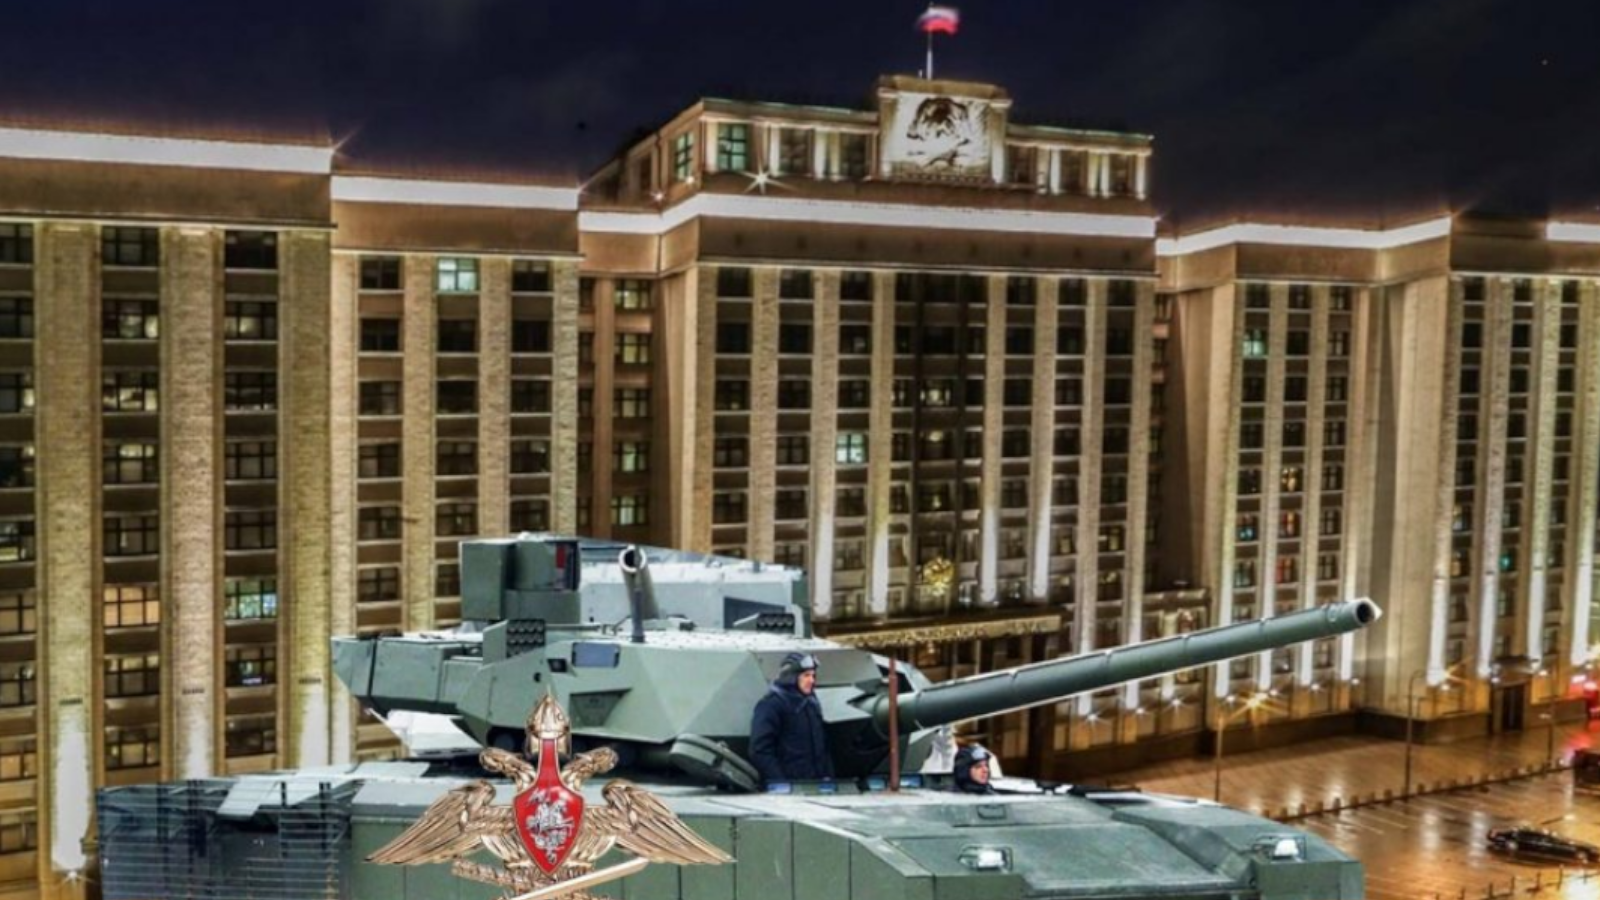 The Russian Guard was given the official right to have heavy military equipment